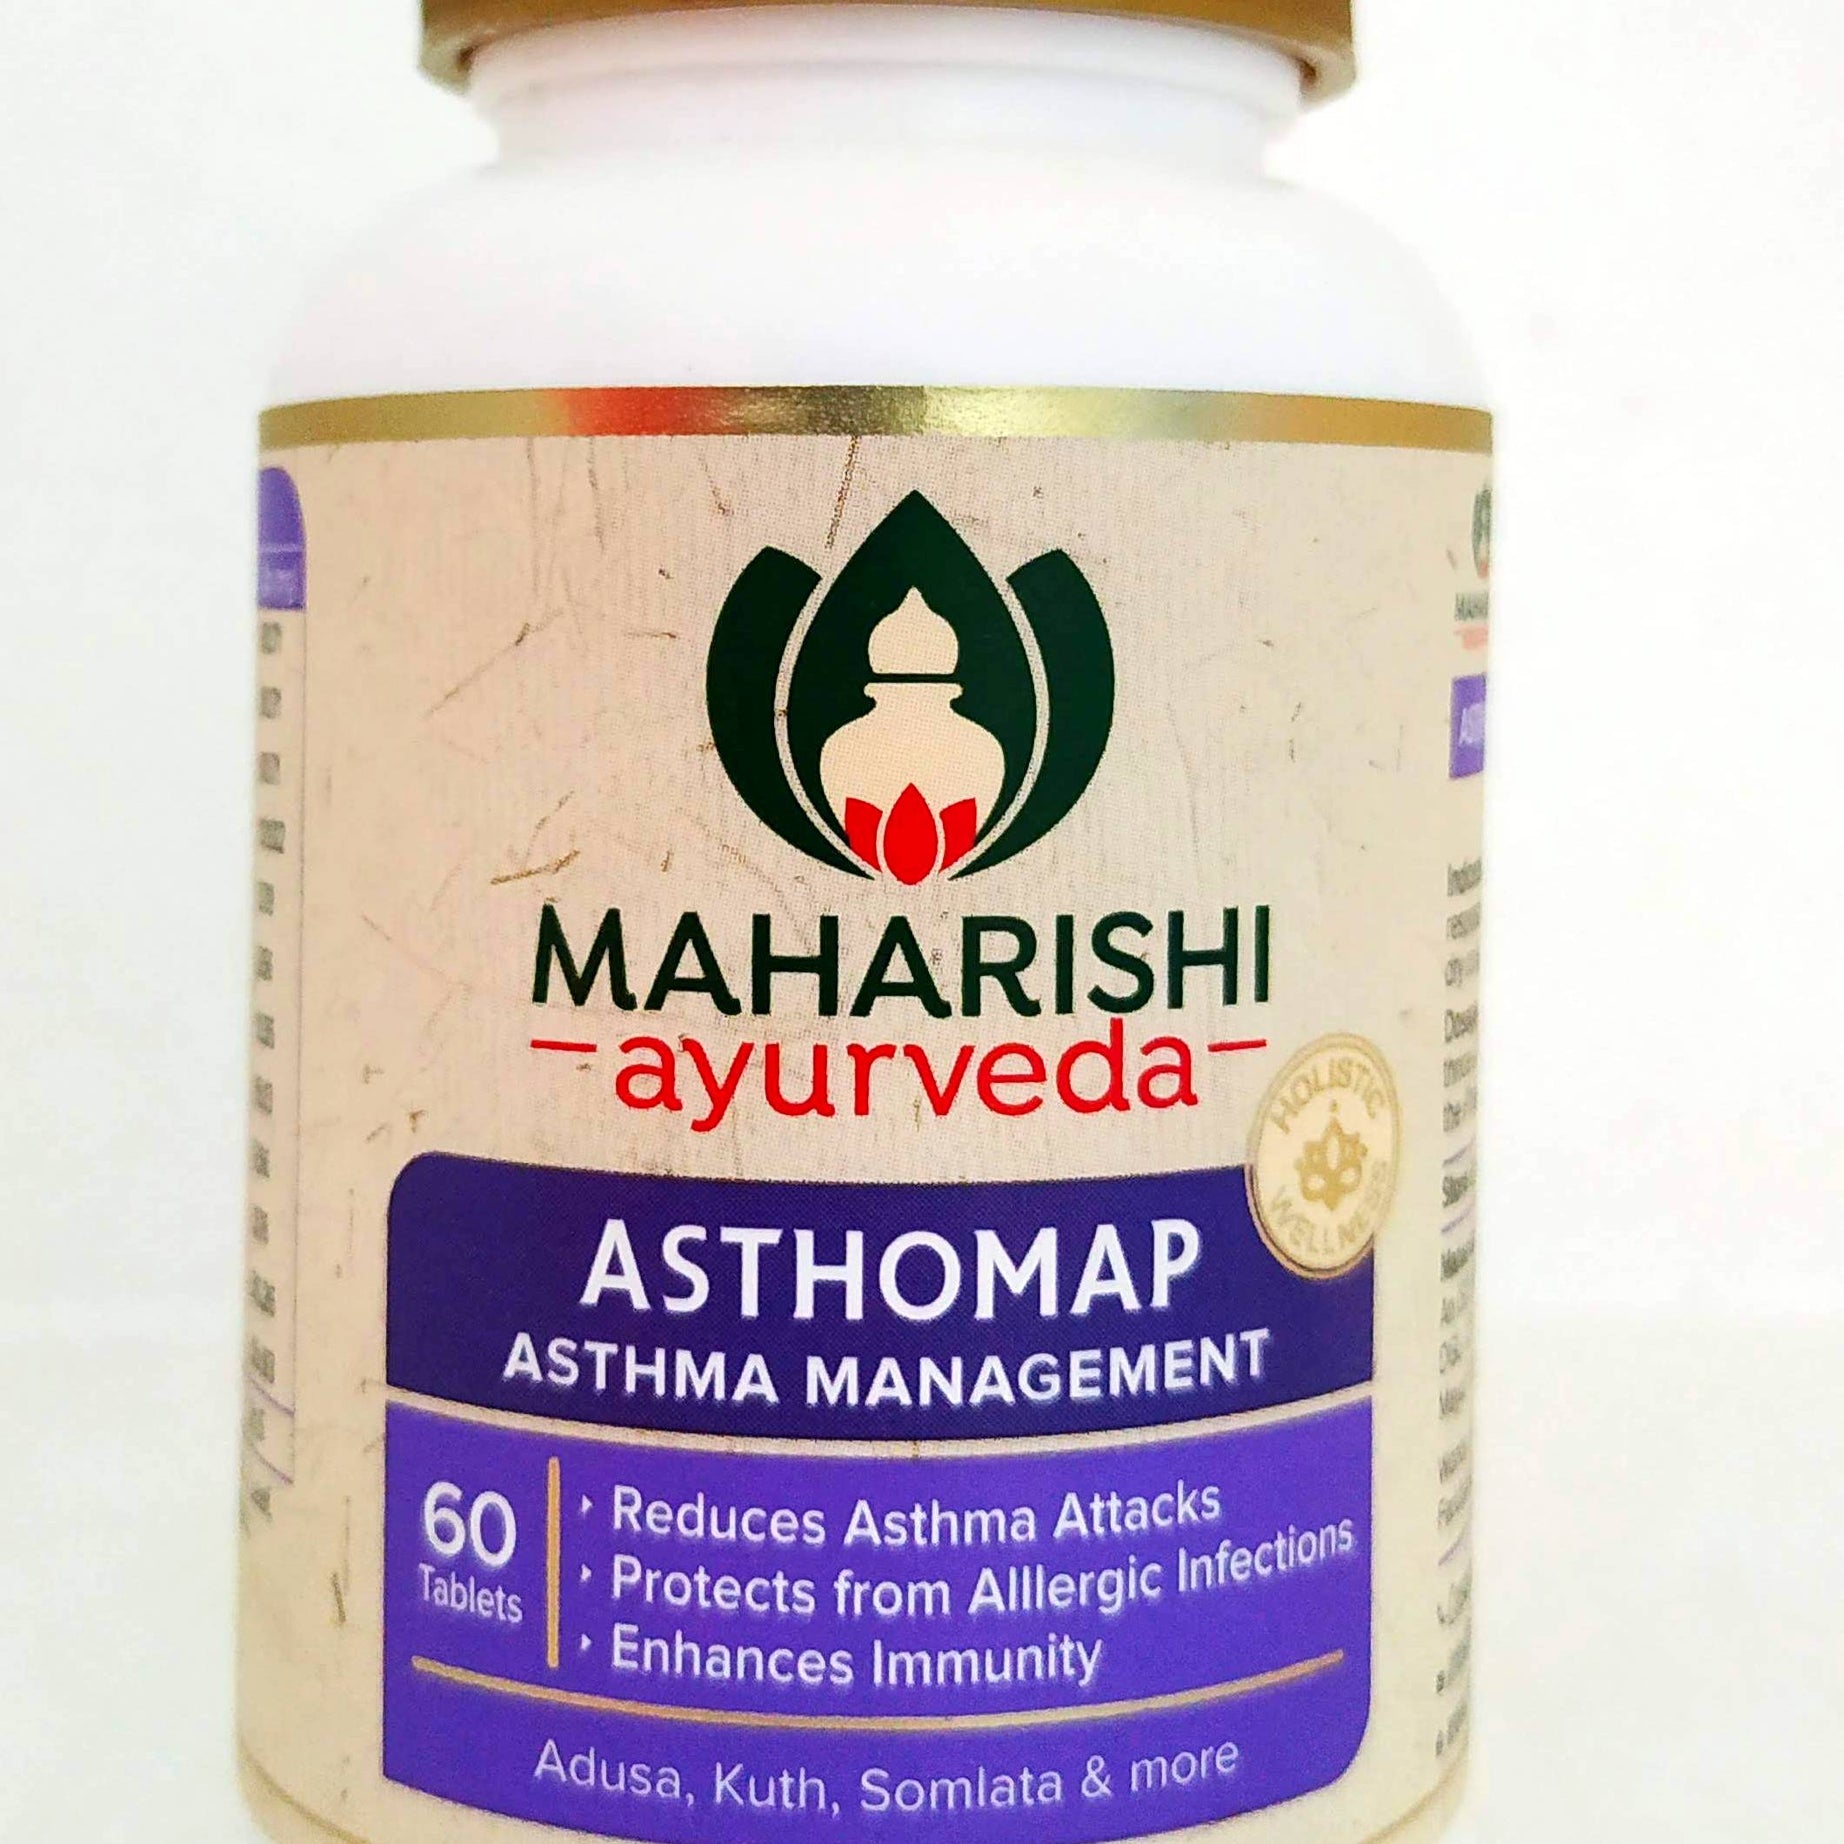 Shop Asthomap Tablets - 60Tablets at price 165.00 from Maharishi Ayurveda Online - Ayush Care